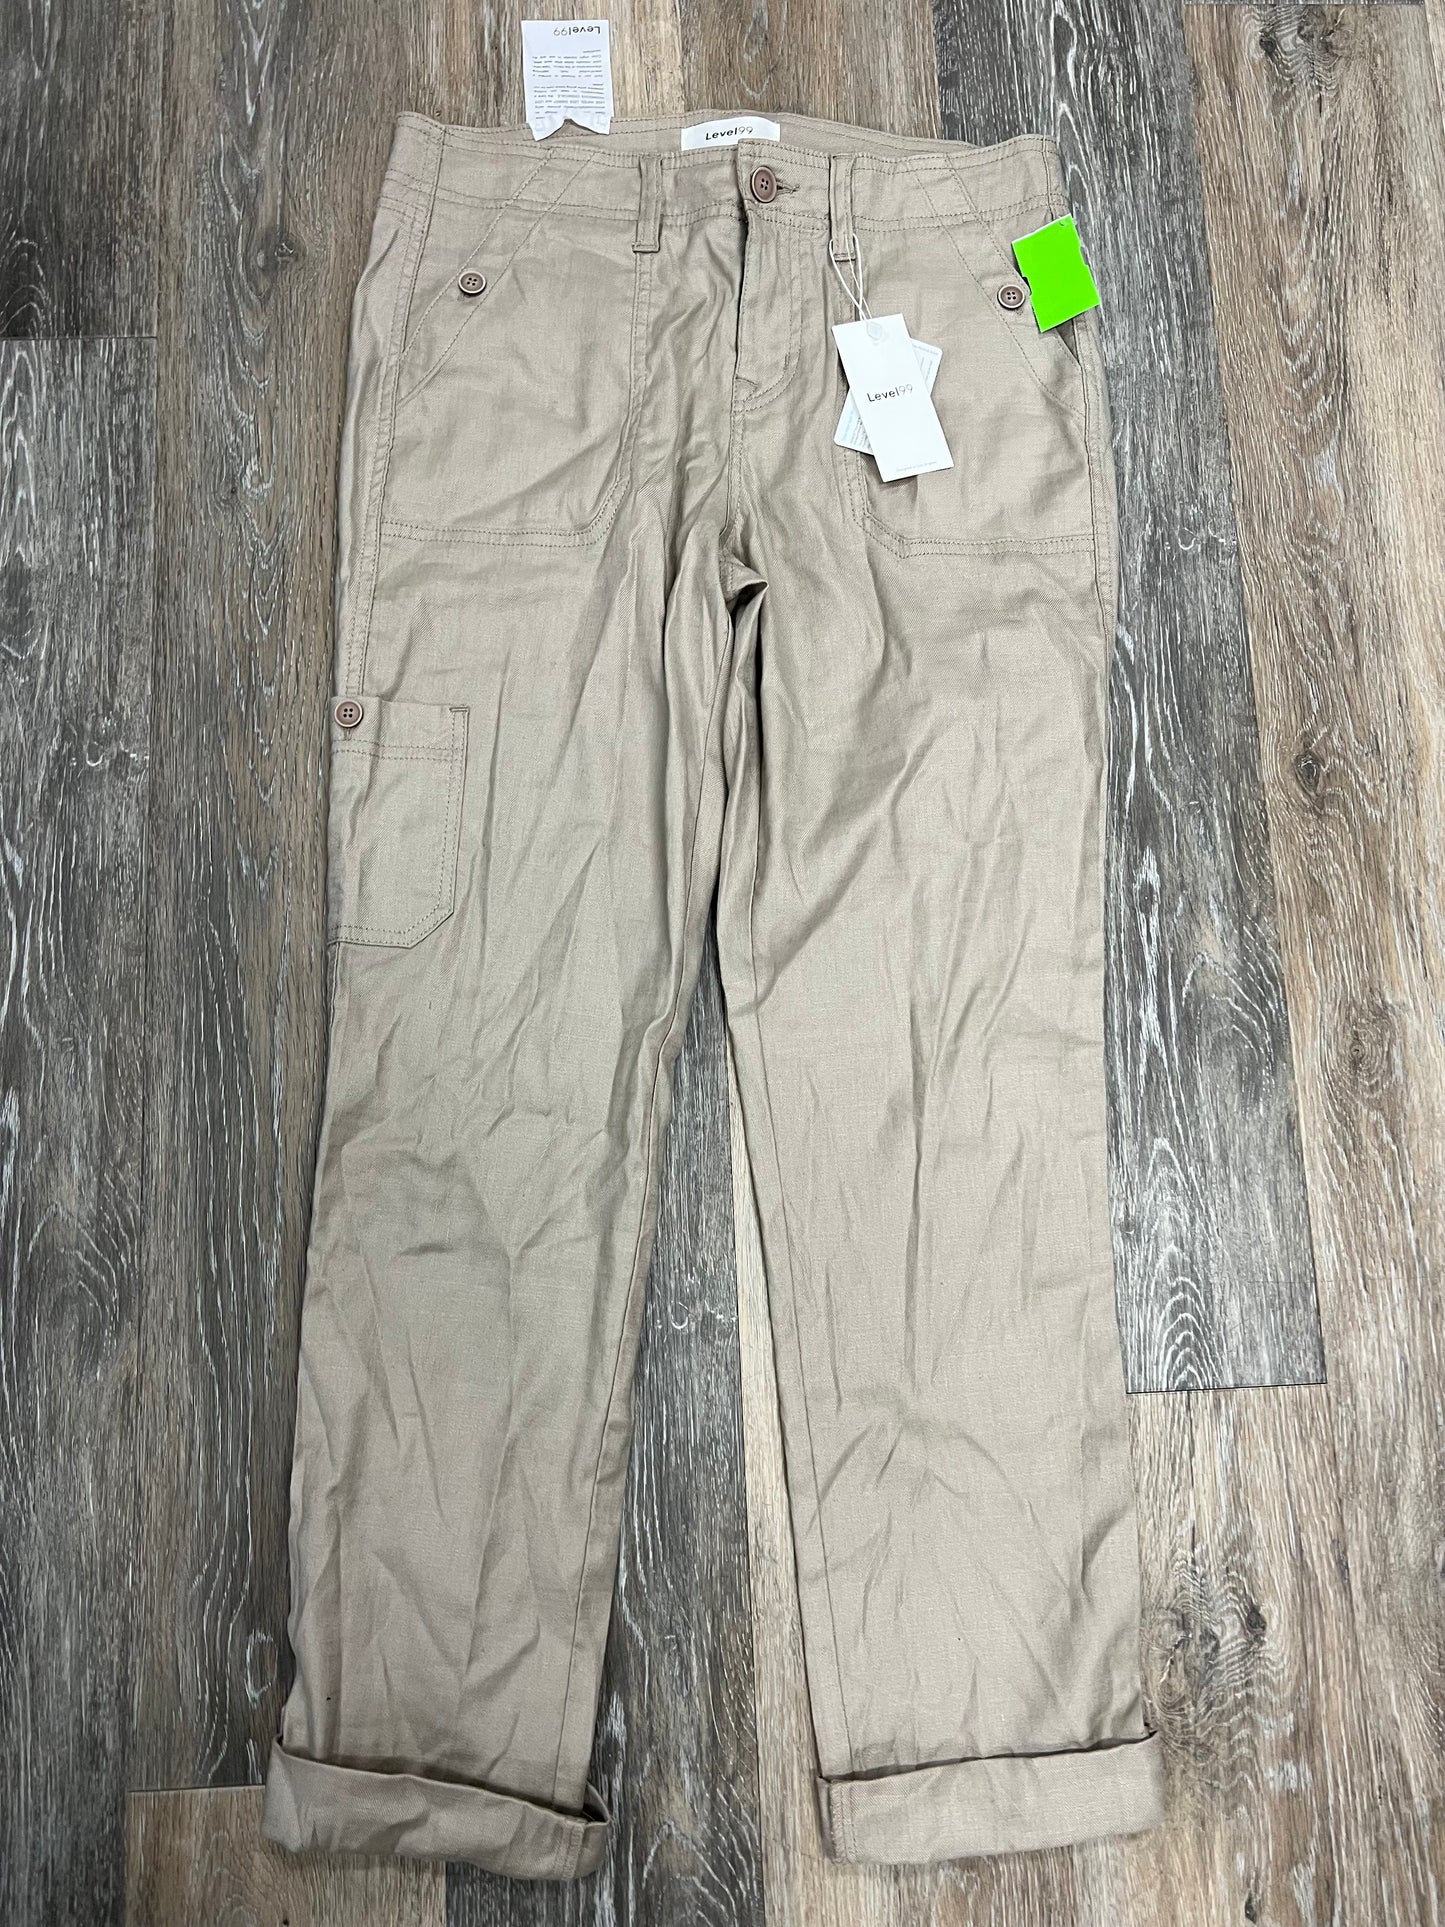 Pants Cargo & Utility By Level 99  Size: 4/27